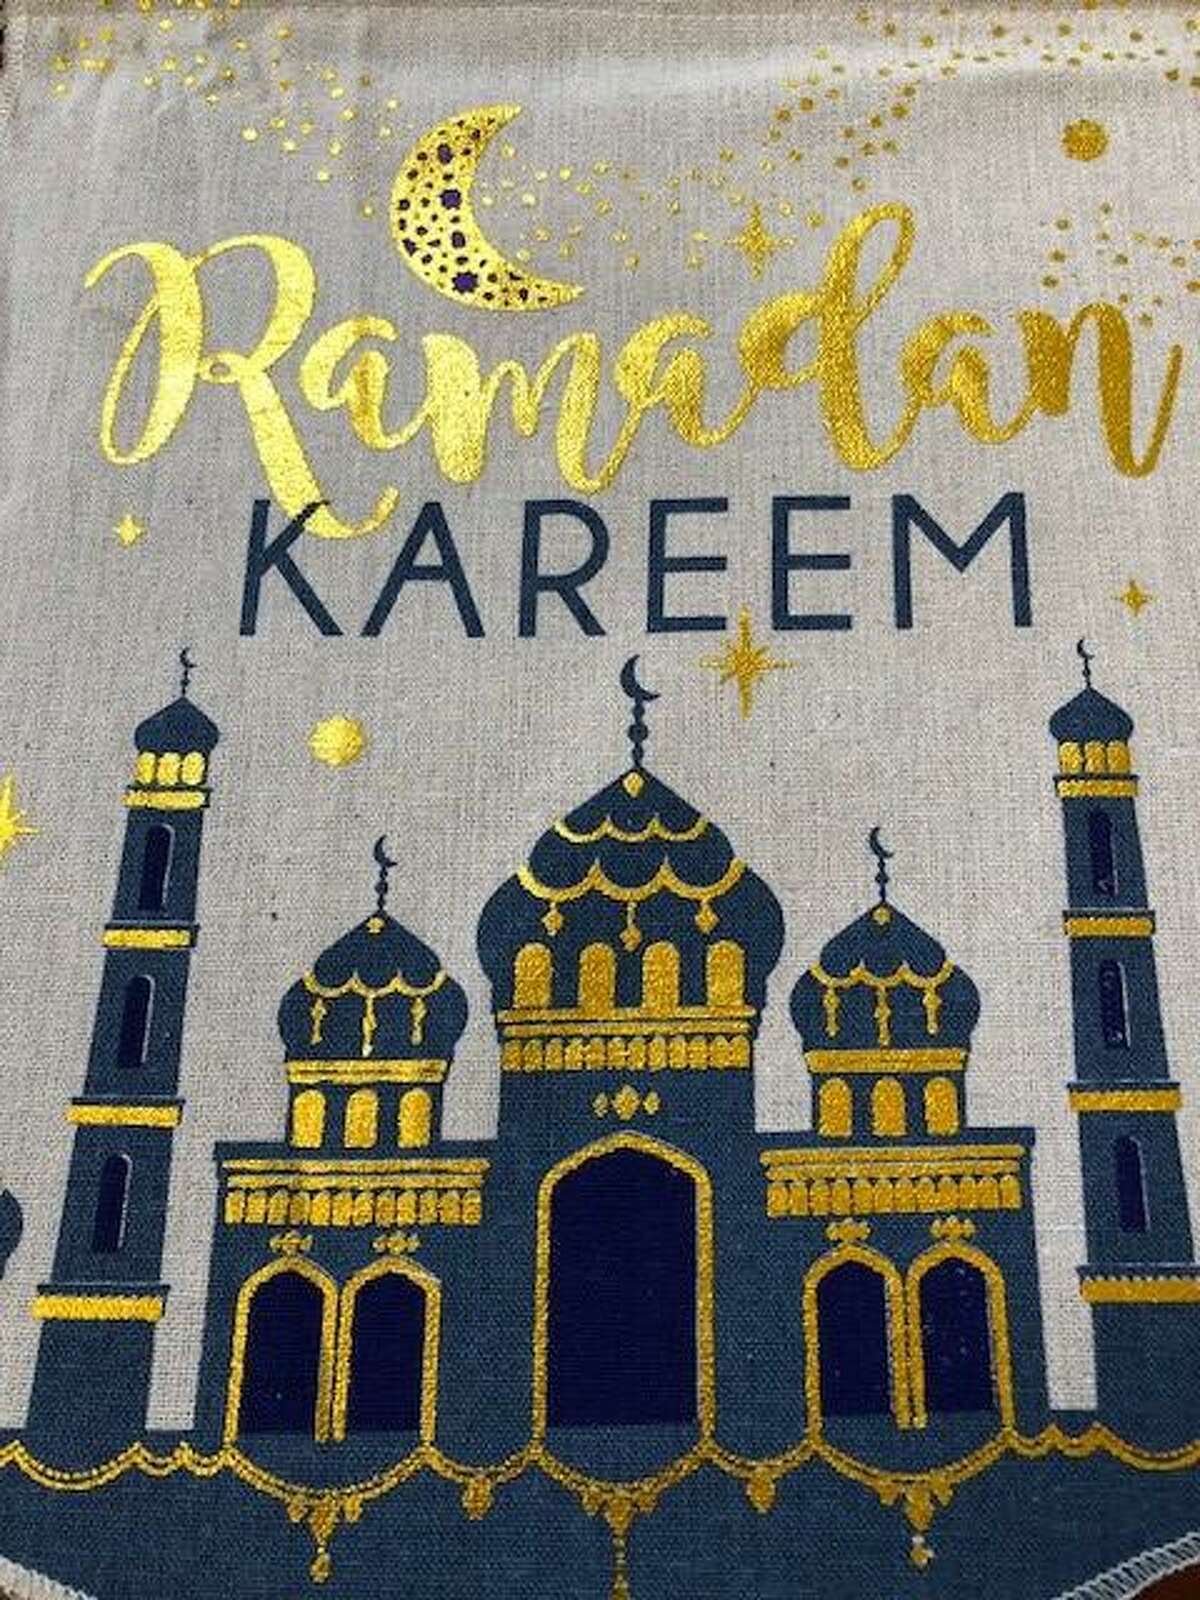 Many Muslim families decorate their homes with various items during the month of Ramadan, like this banner that hangs from one family's door in The Woodlands. The word "Kareem" means welcome in Islamic.